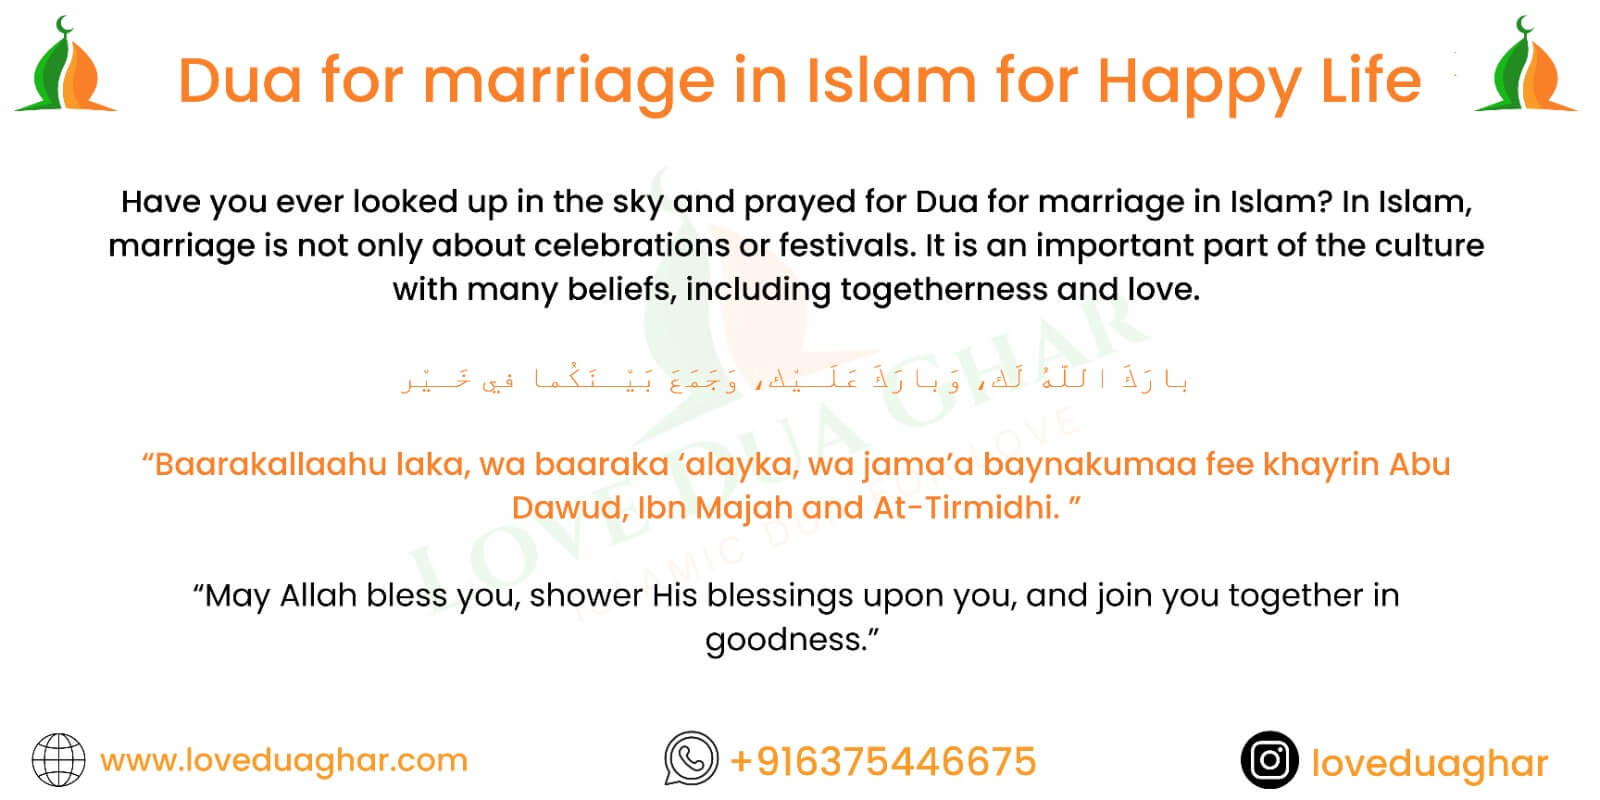 Dua for marriage in Islam